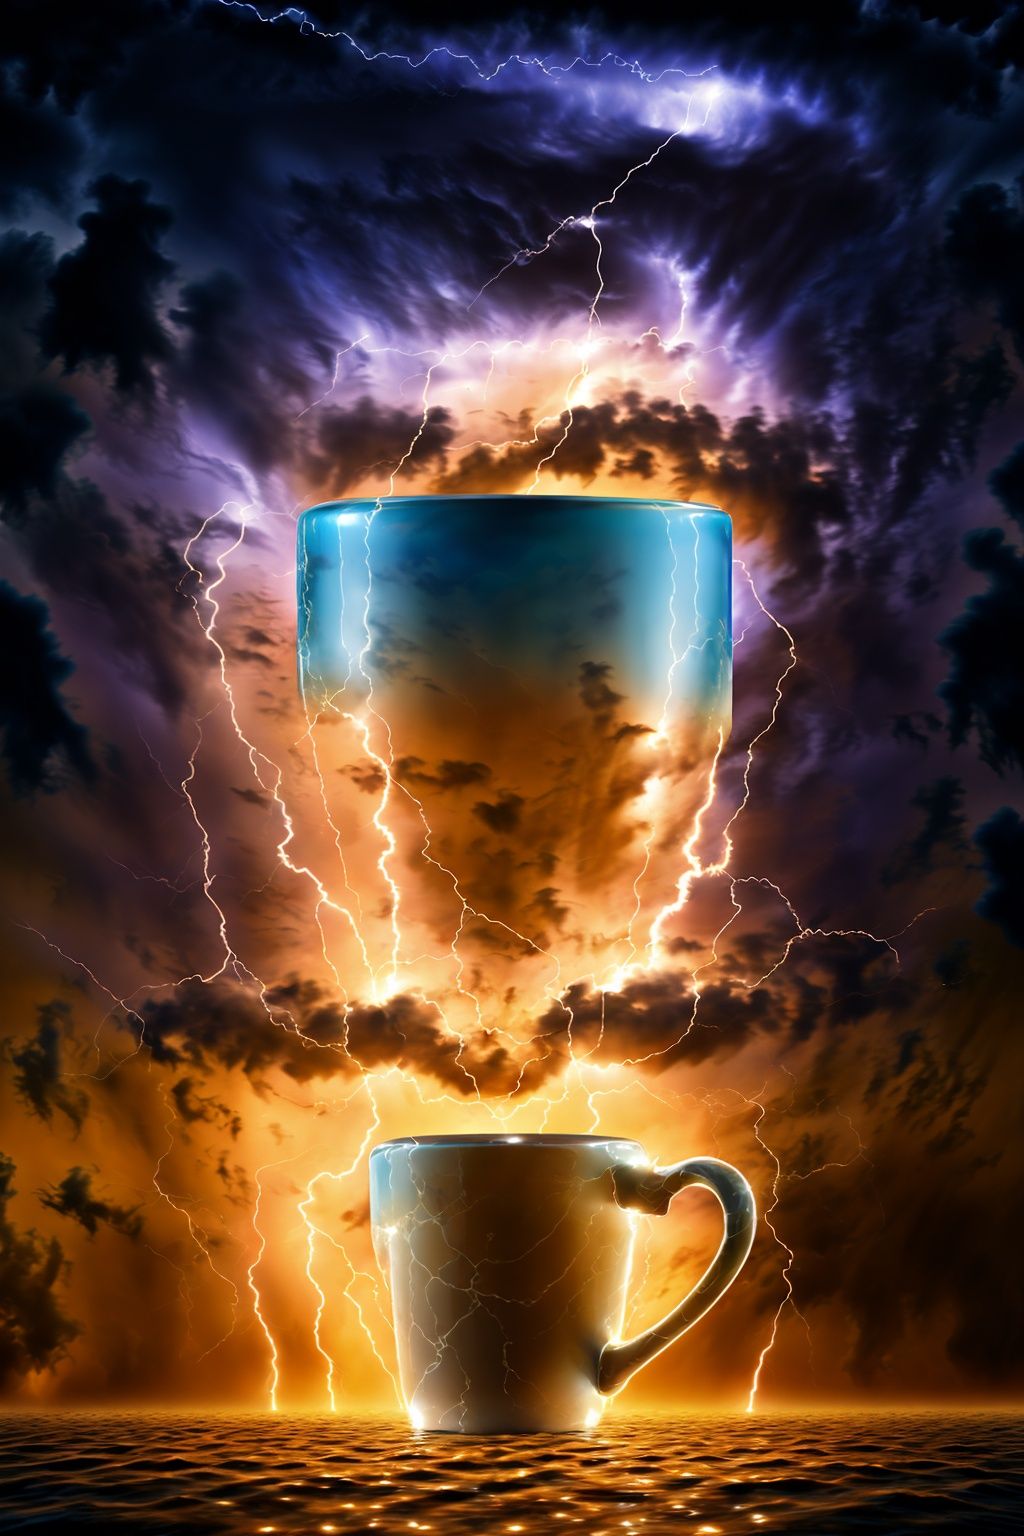 A brontosaurus formed by lightning dances in the cup,intricate details, explosion, chaos, lightning, debris, 8k, hyper detailed, magical and epic, epic light, concept and film art, t-shirt design, the most perfect and beautiful image ever created. Image taken with the Sony A7SIII camera. 8k photo cinematic, cinematic, photo, typography,Splash